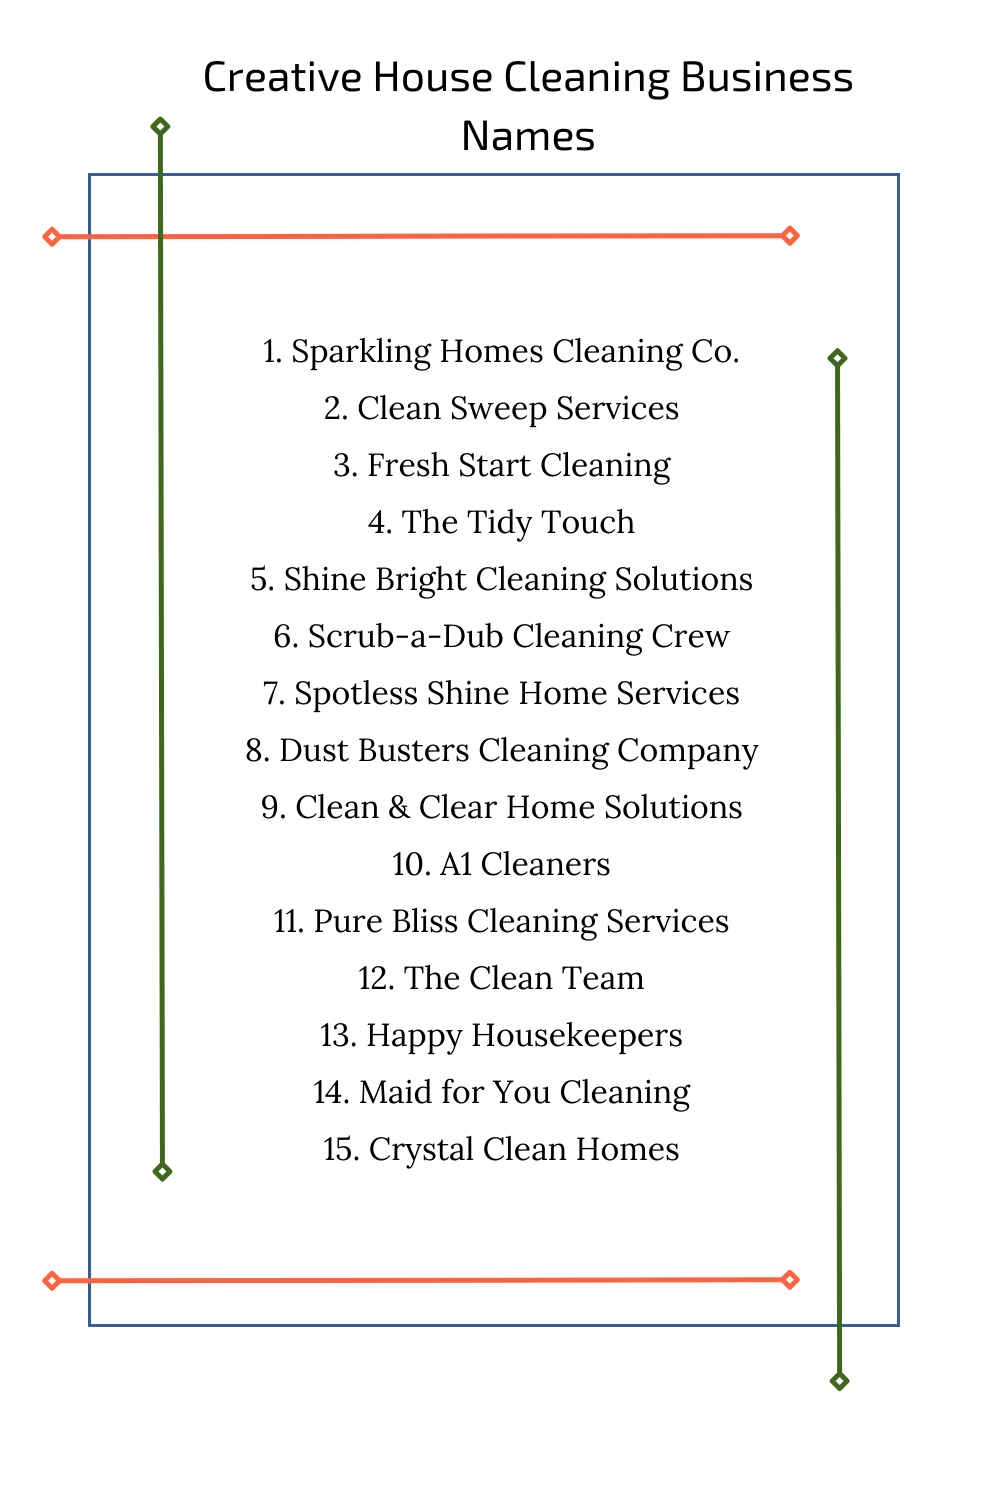 Creative House Cleaning Business Names